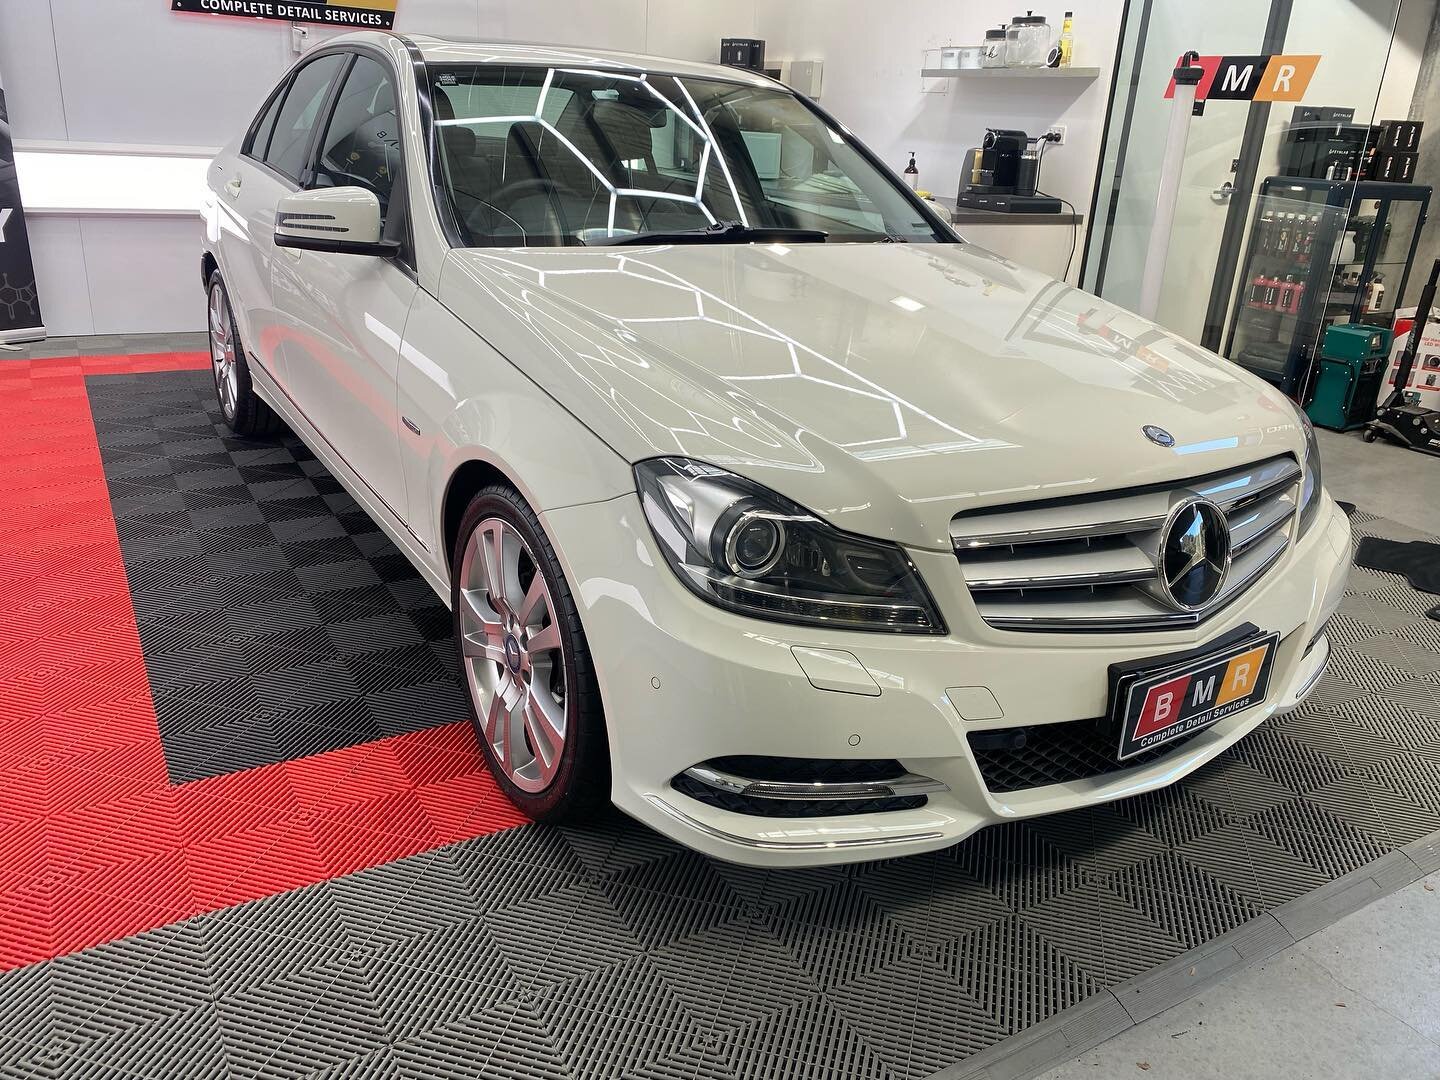 Complete overhaul of this 10 year old C300 Mercedes. Heavy compounding on bonnet and boot to remove scratches from cats then laid down our Graphene coating for protection. Interior received a deep steam clean and treated leather and carpet with a pro